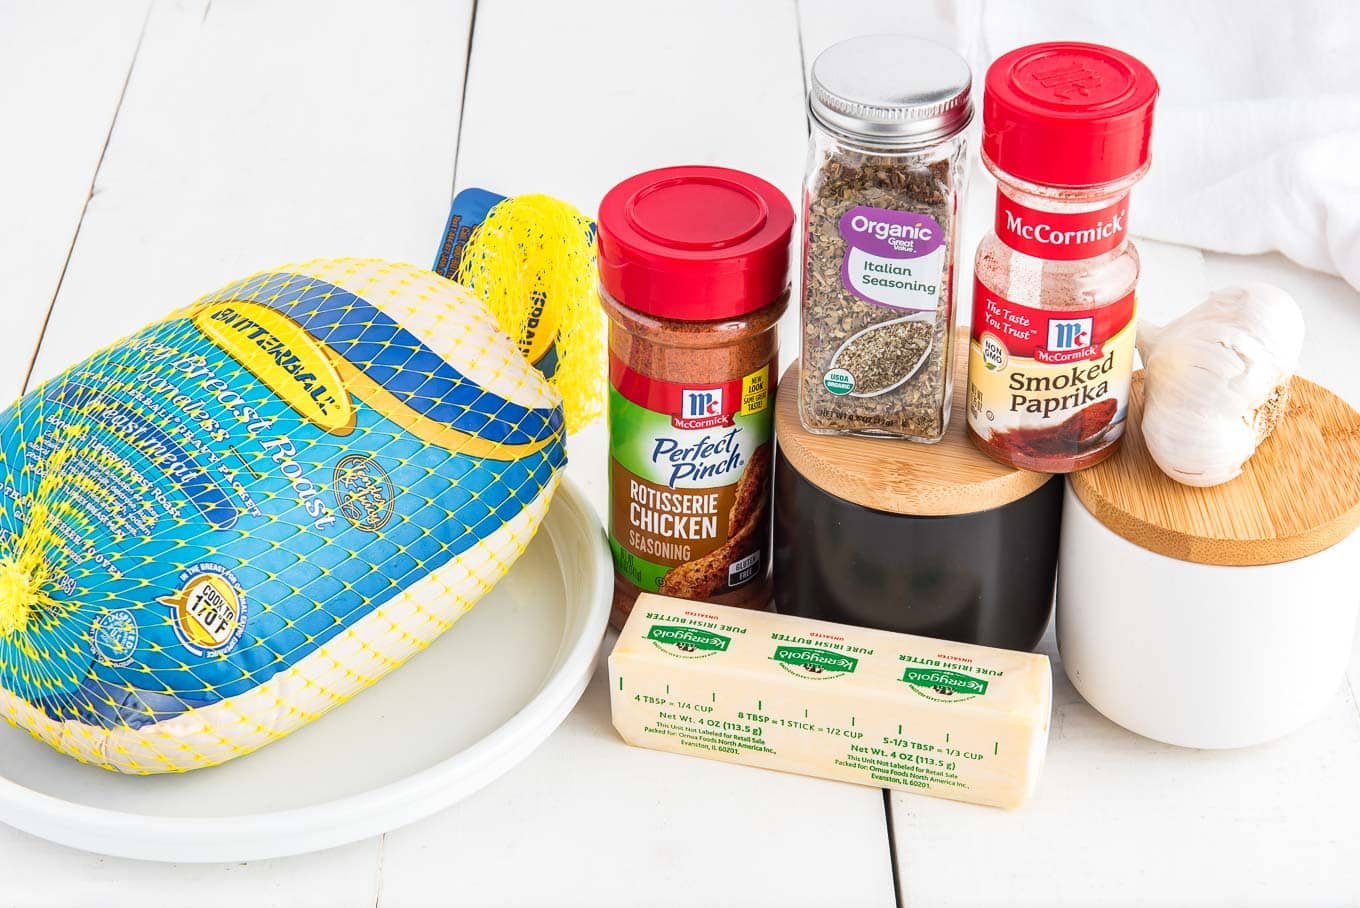 Ingredients on the table to cook a boneless turkey breast in the oven on the counter before preparing.